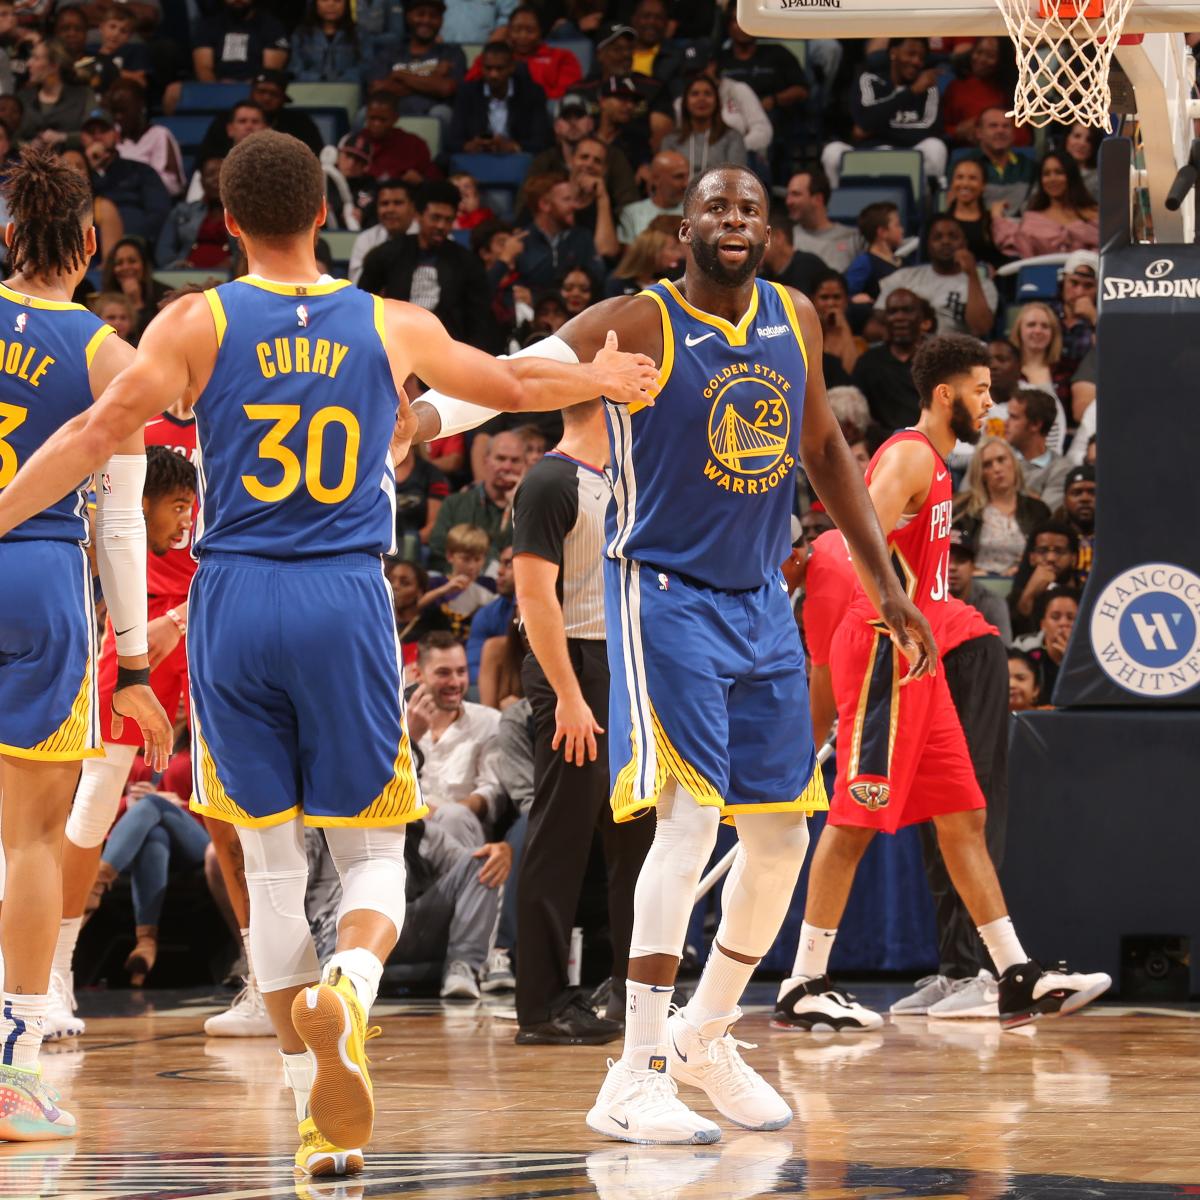 Steph Curry leads Warriors to blowout win vs. Pelicans - Golden